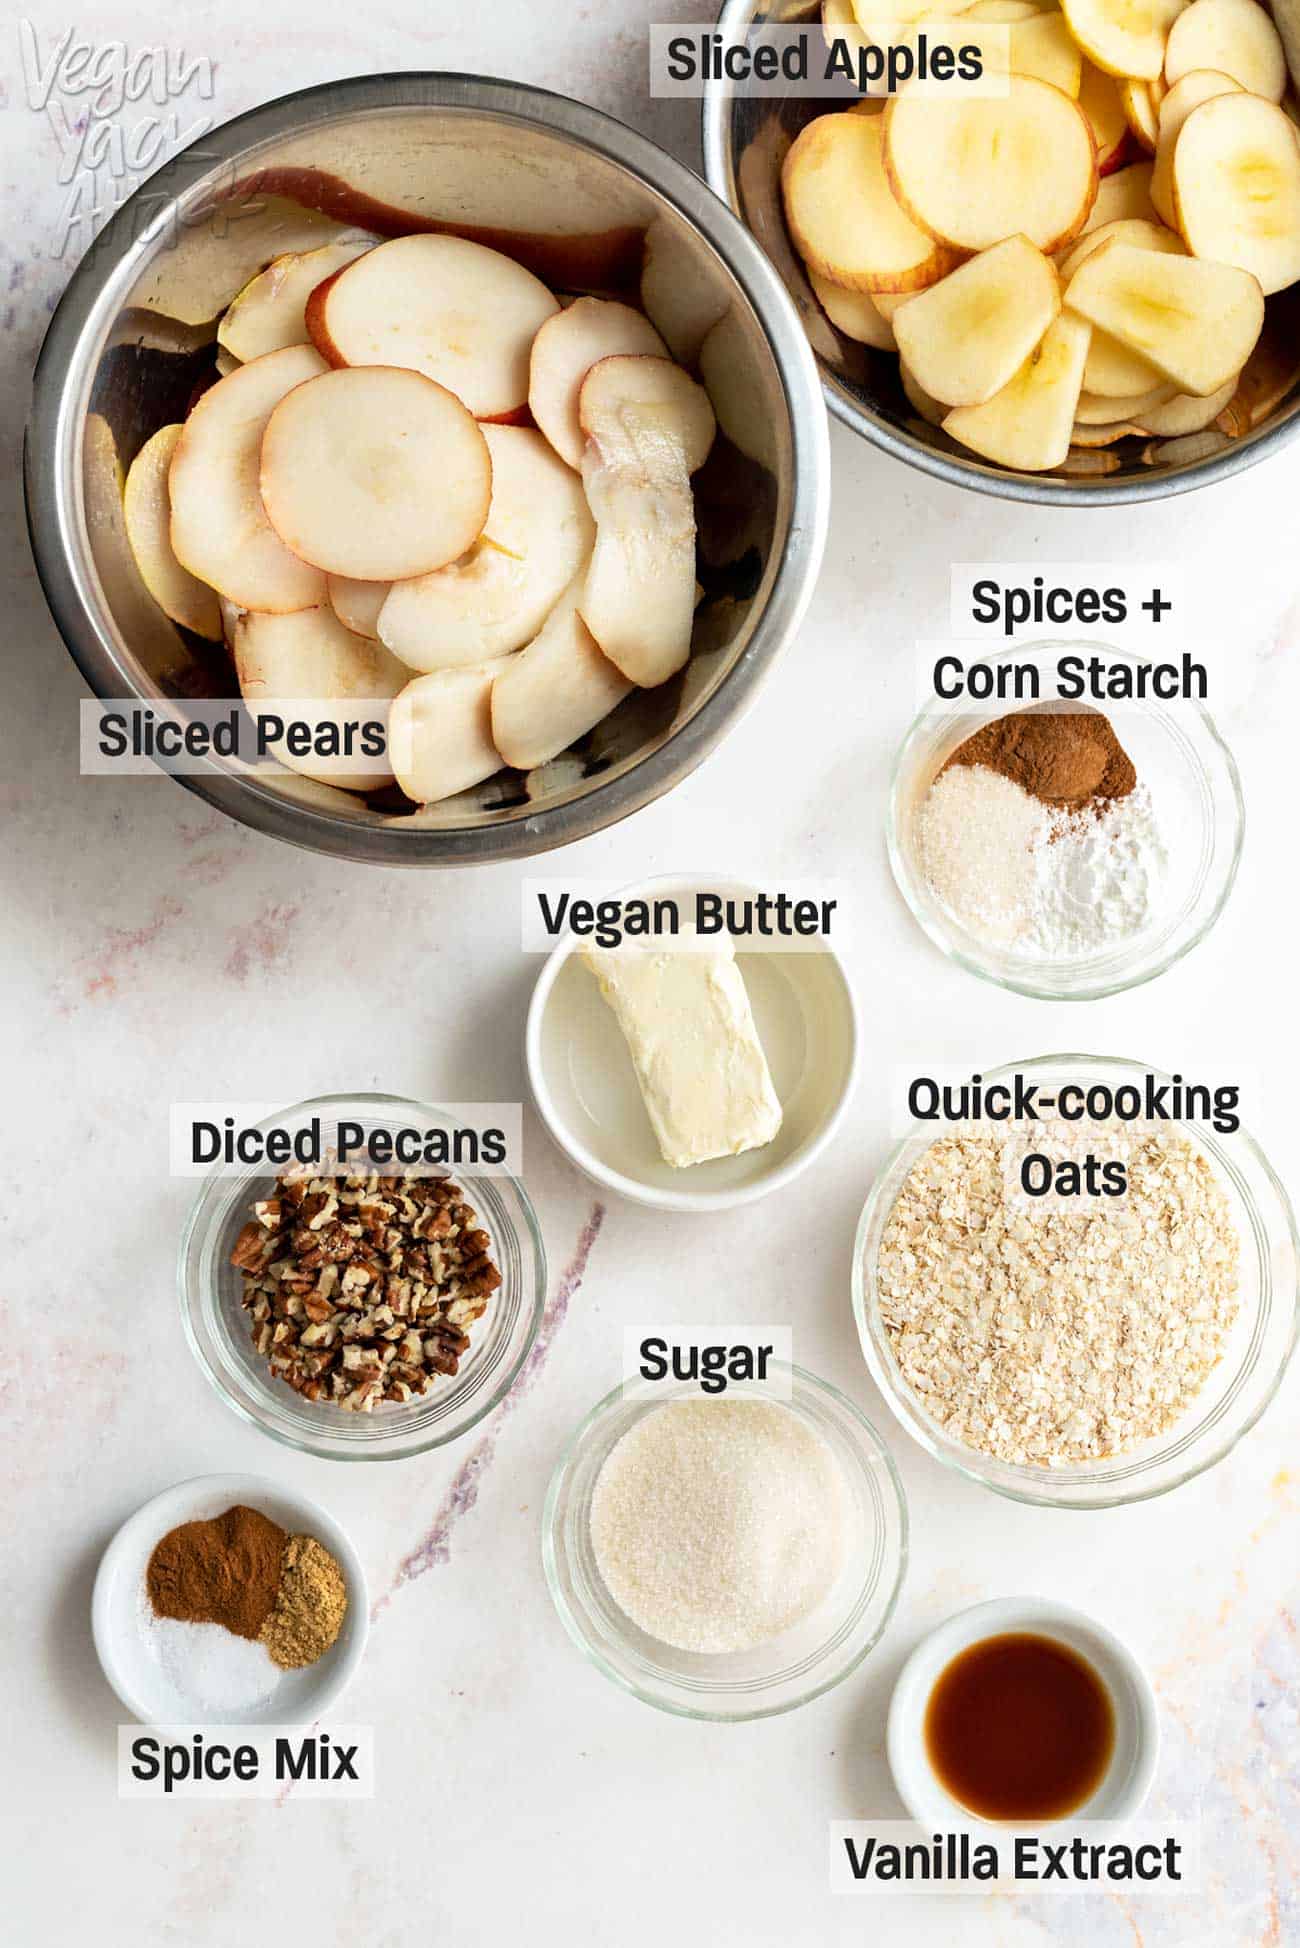 Sliced apples and pears, plus other ingredients in ramekins with text labels